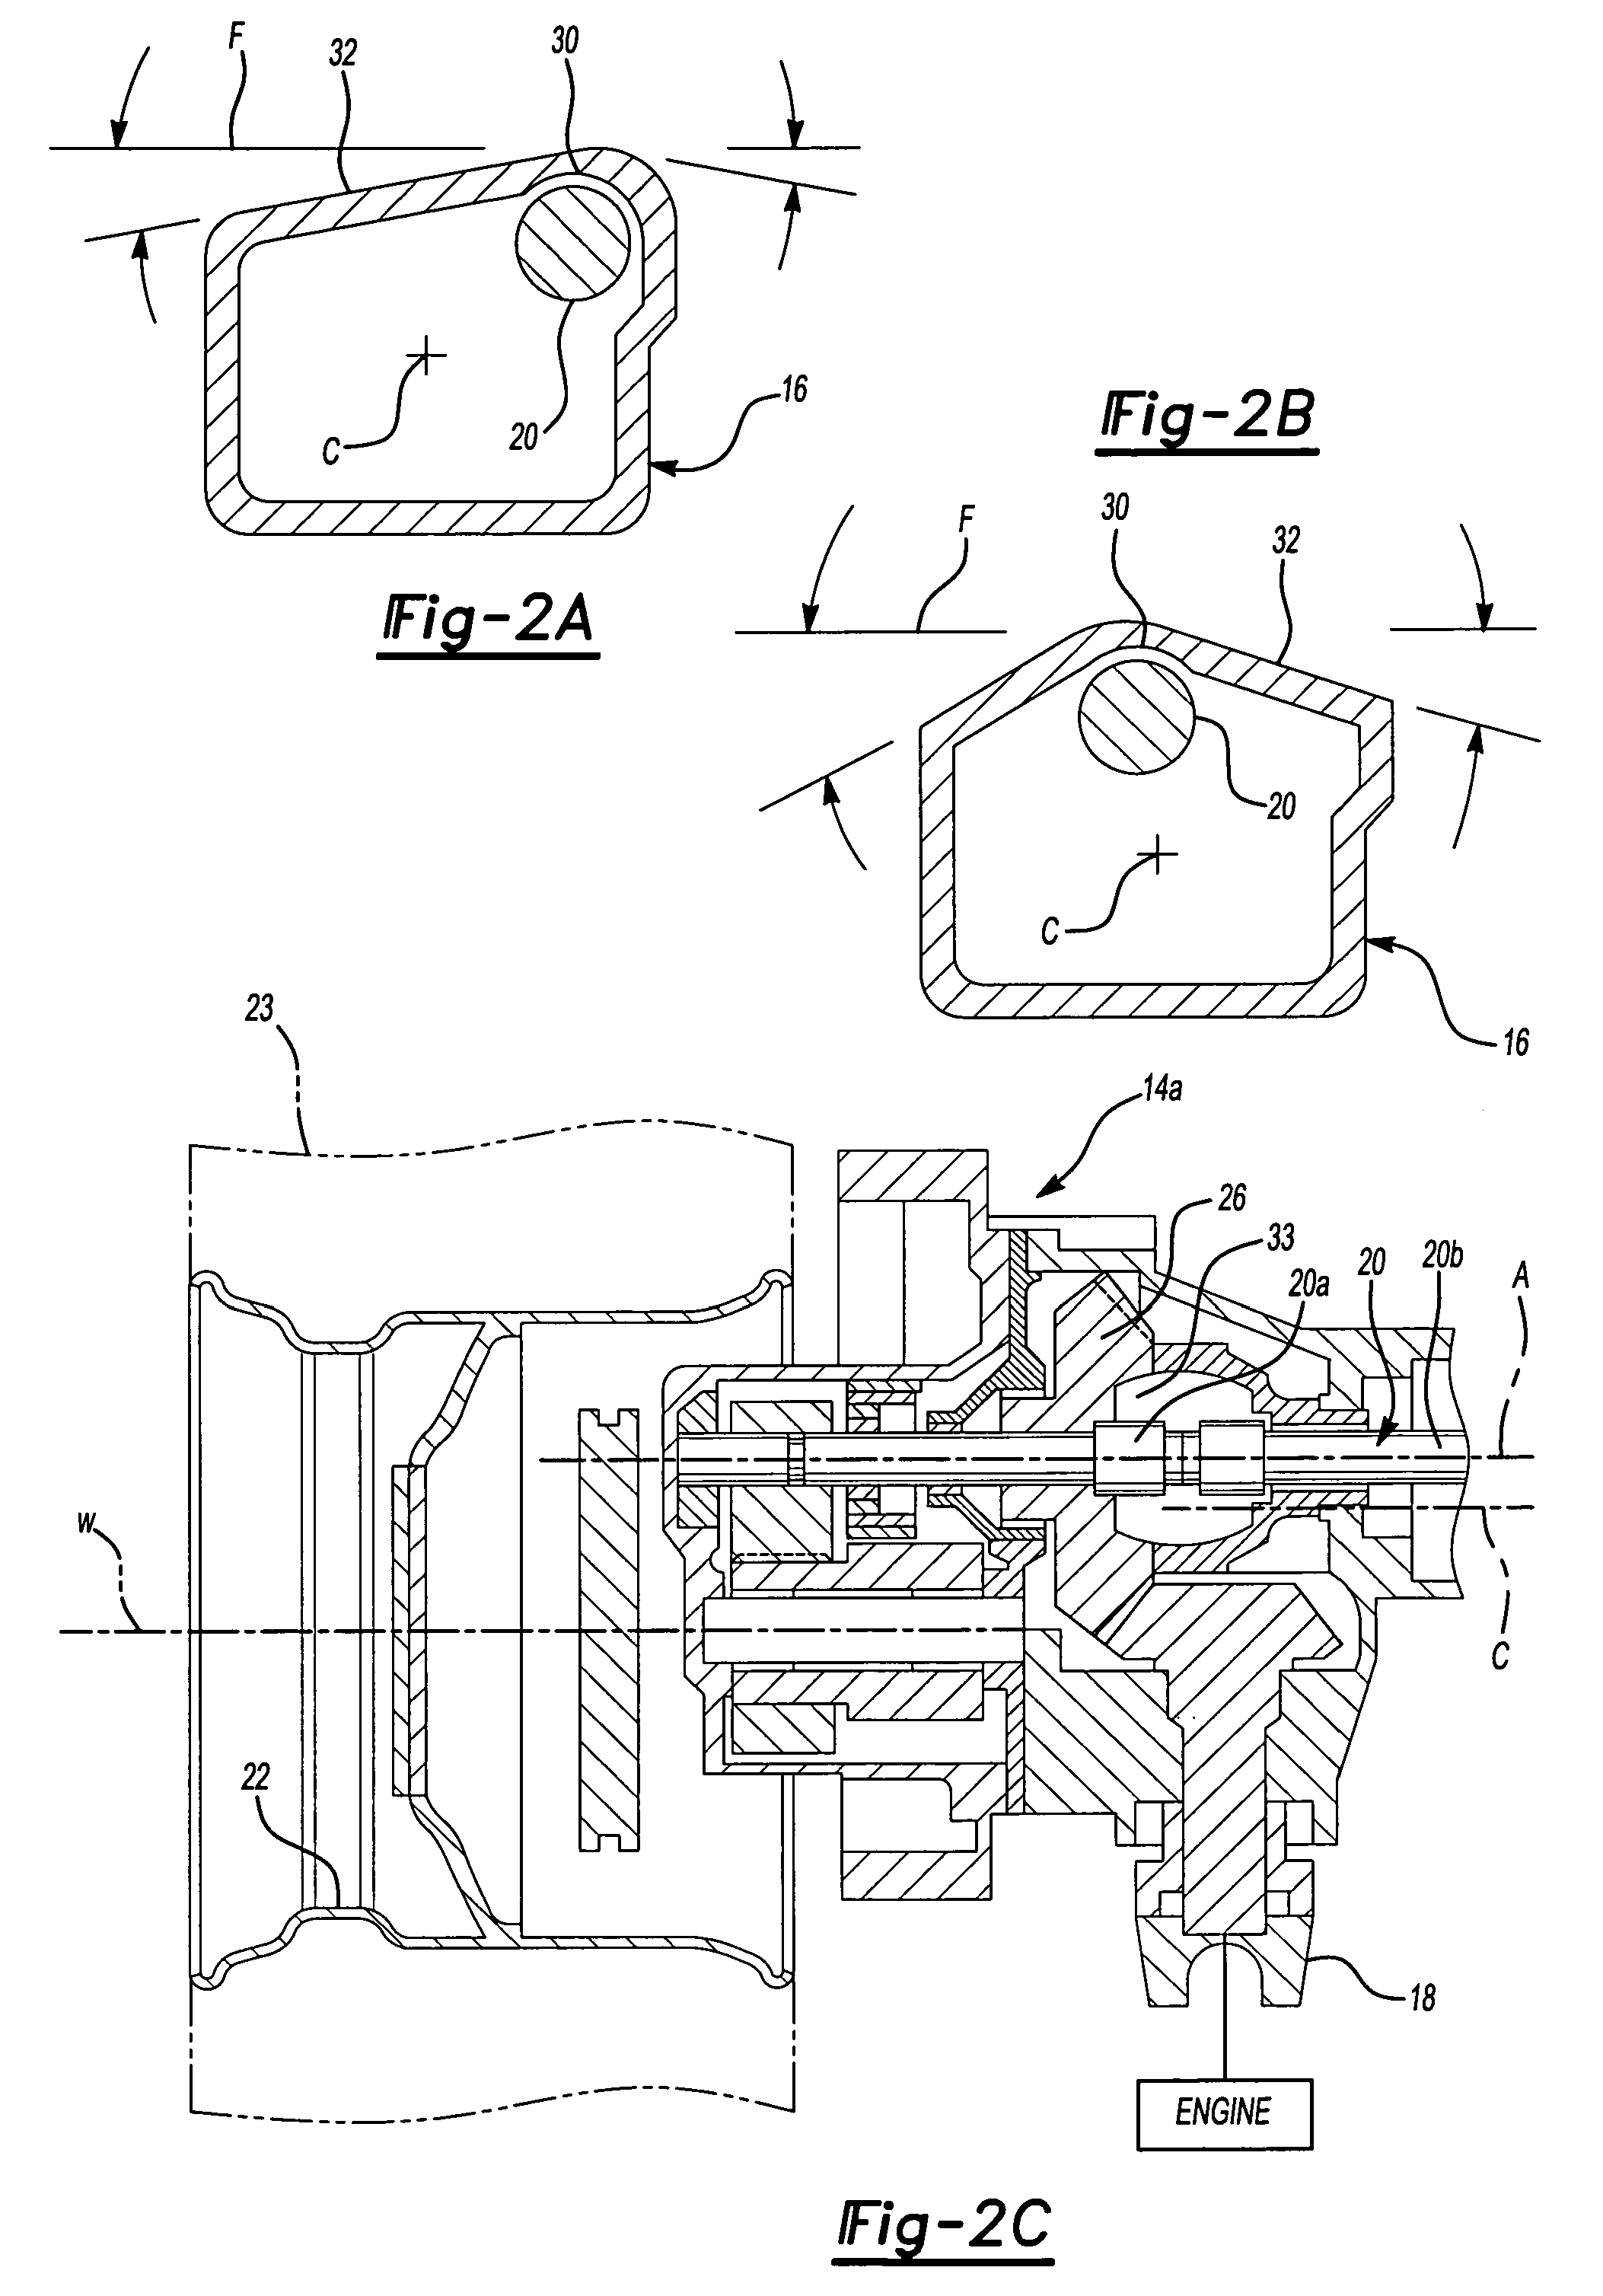 Inverted portal axle configuration for a low floor vehicle